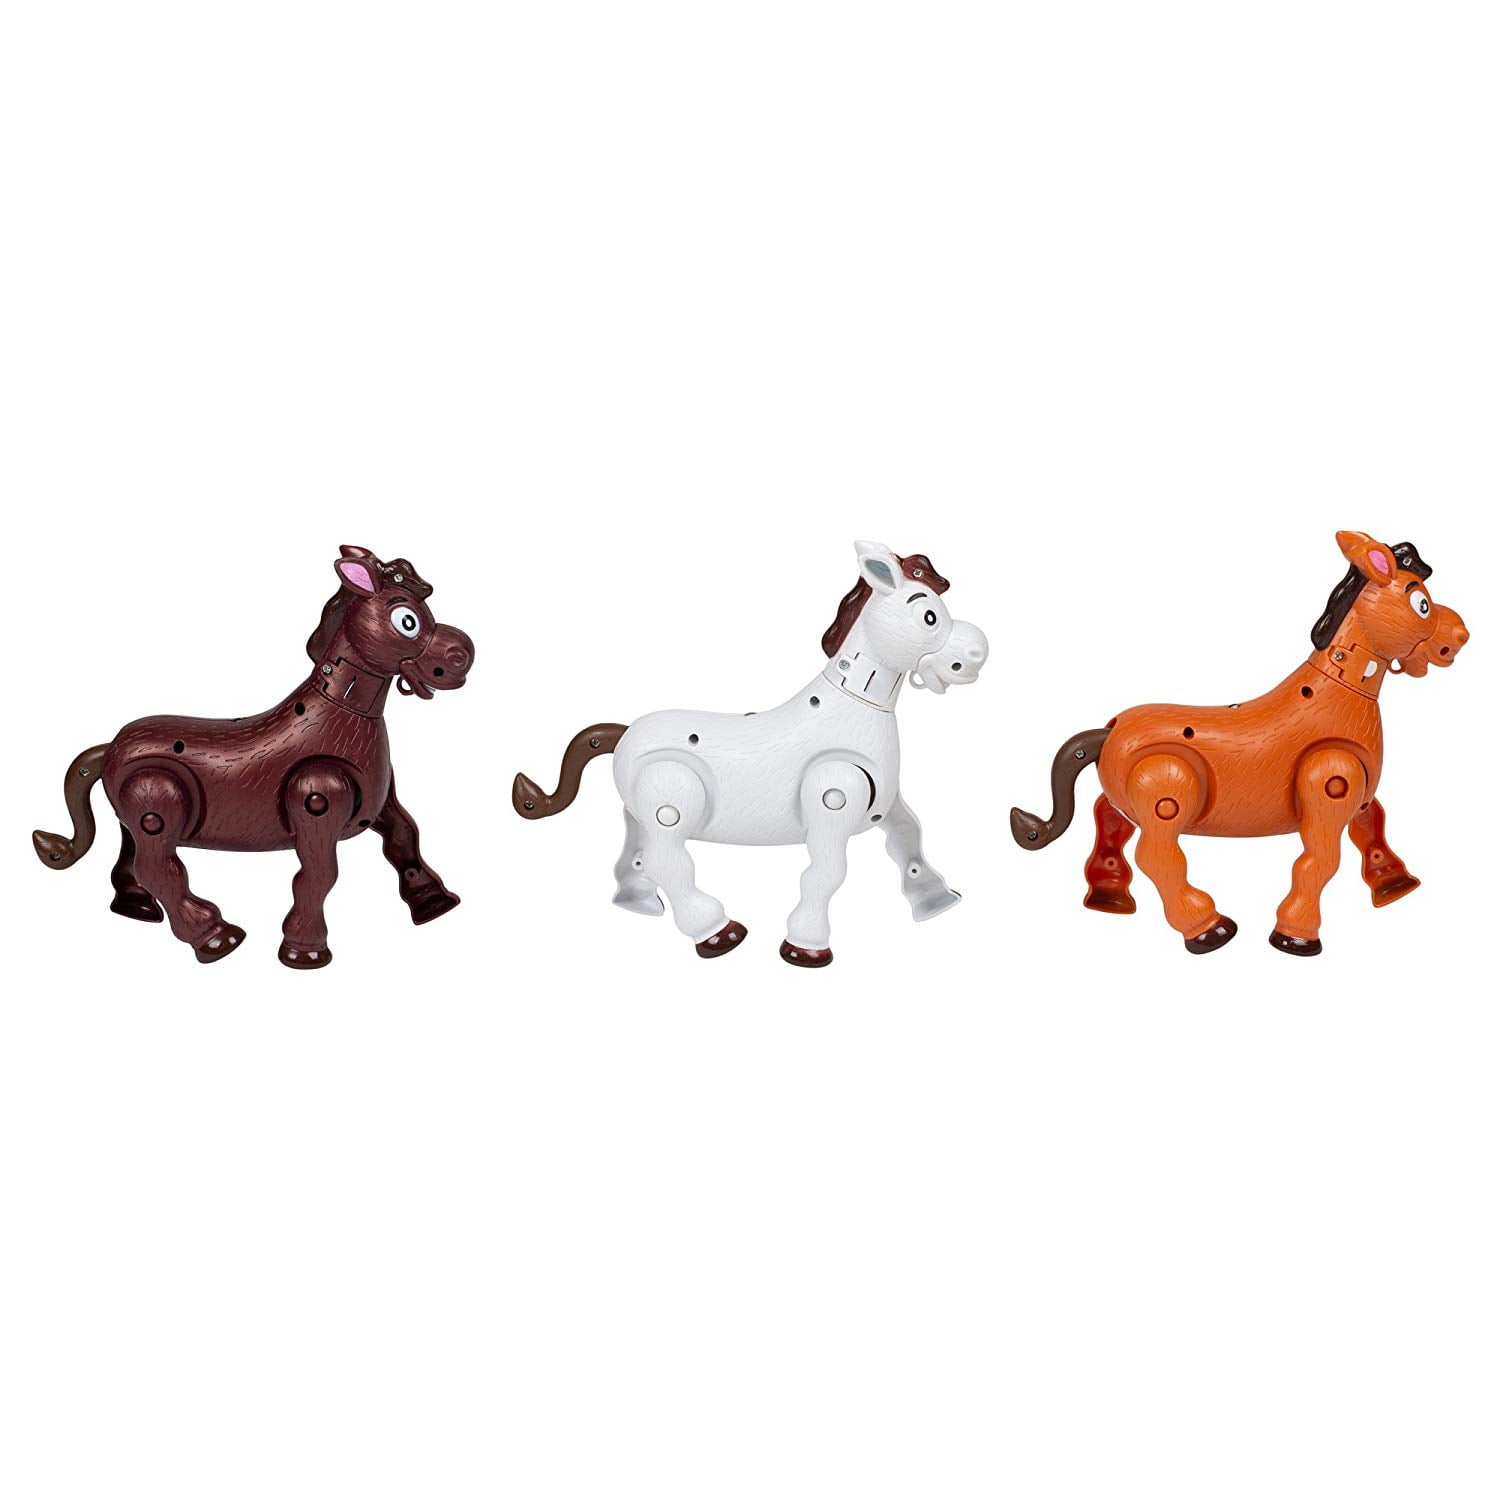 7" Musical Galloping Action Sound Western Horses Kids Toys 3PC Set 